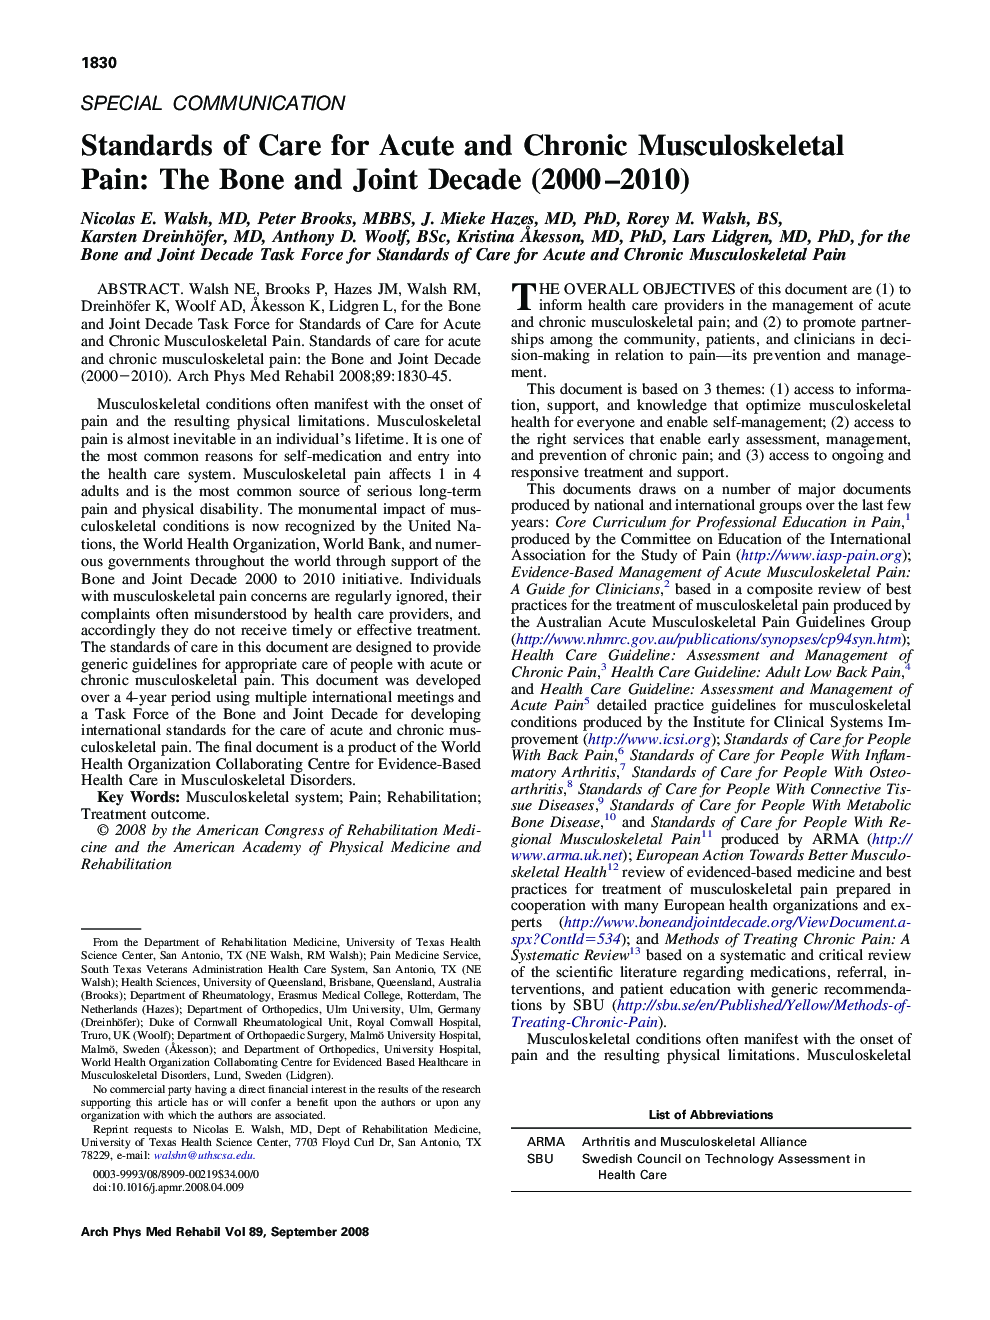 Standards of Care for Acute and Chronic Musculoskeletal Pain: The Bone and Joint Decade (2000-2010)